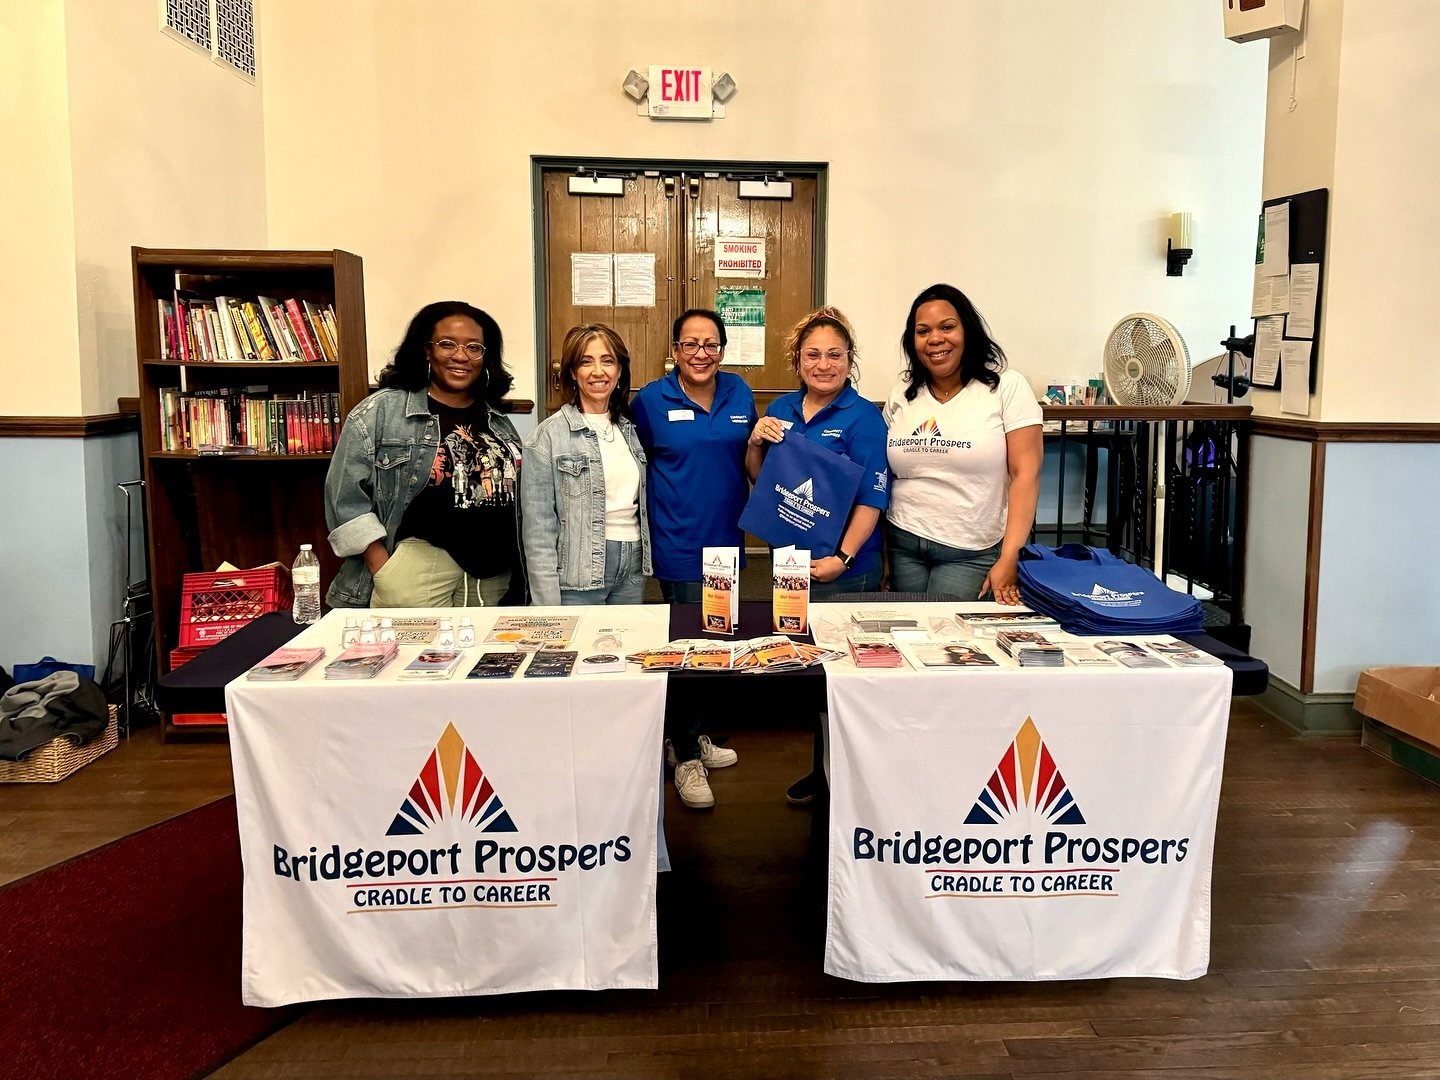 We are here at Golden Hill United Methodist Church at 210 Elm Street in Bridgeport until 5pm for our Blood Drive! Hope to see you soon and bring a friend to help save lives. 🩸 💙 #DonateBlood #SaveLives #BridgeportCT